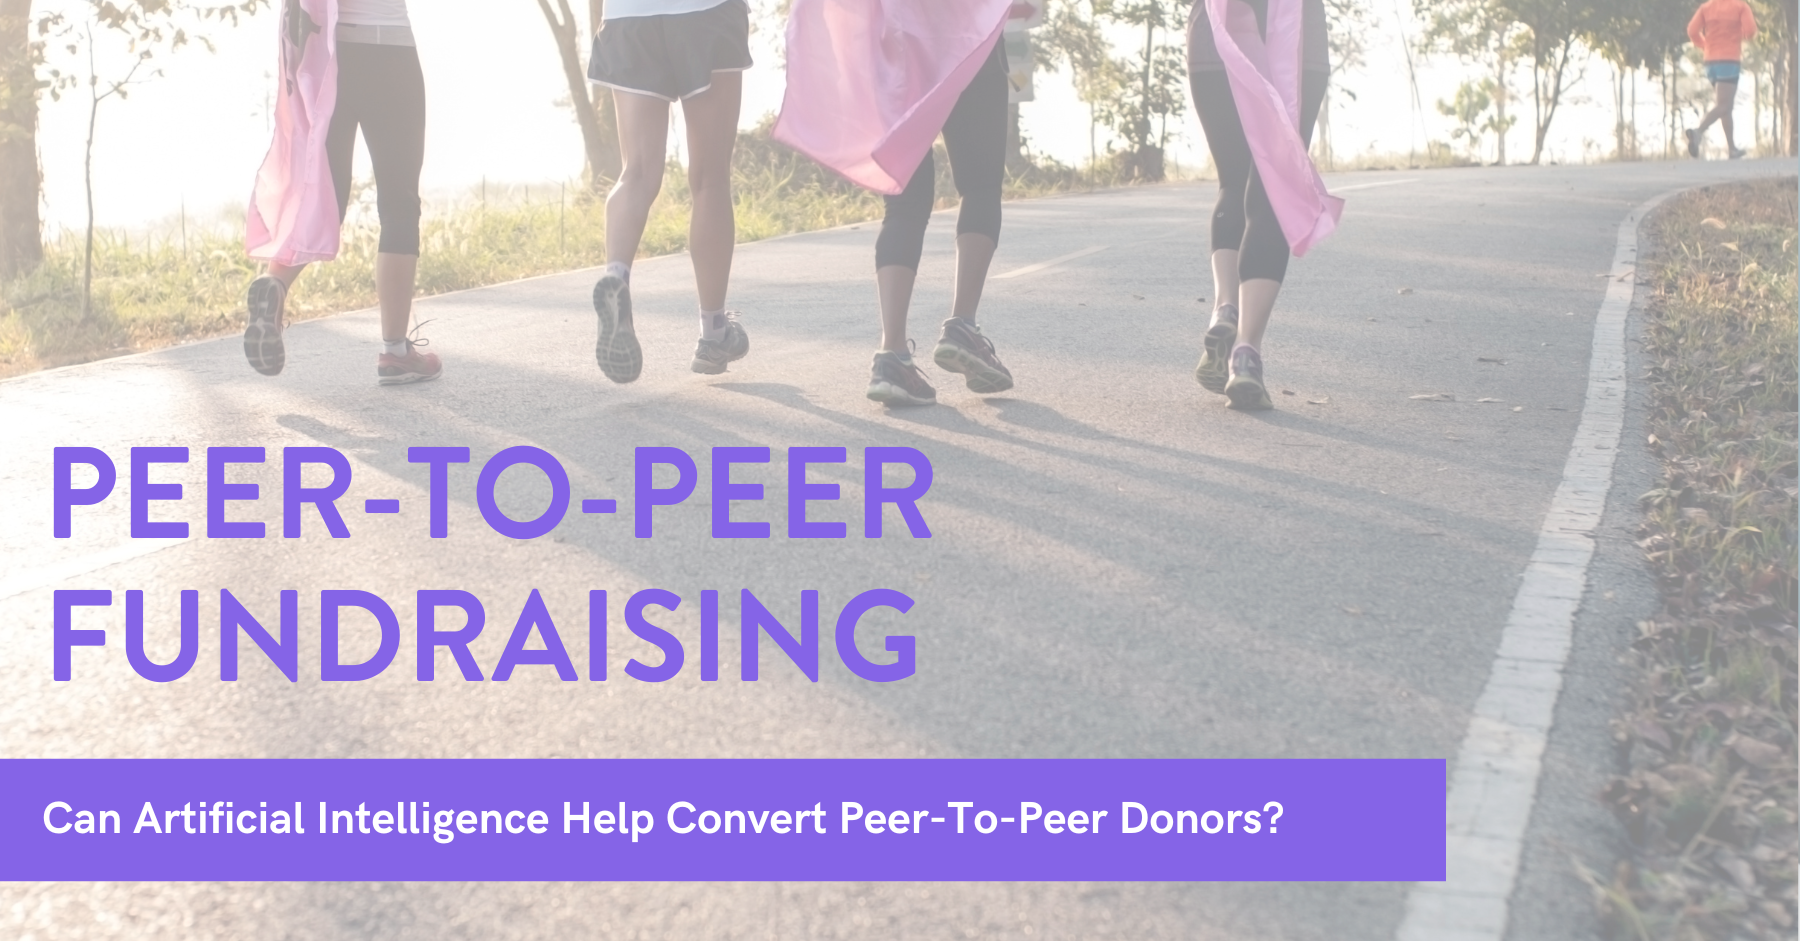 Can Artificial Intelligence Solve the Gaps in Peer-To-Peer Fundraising?